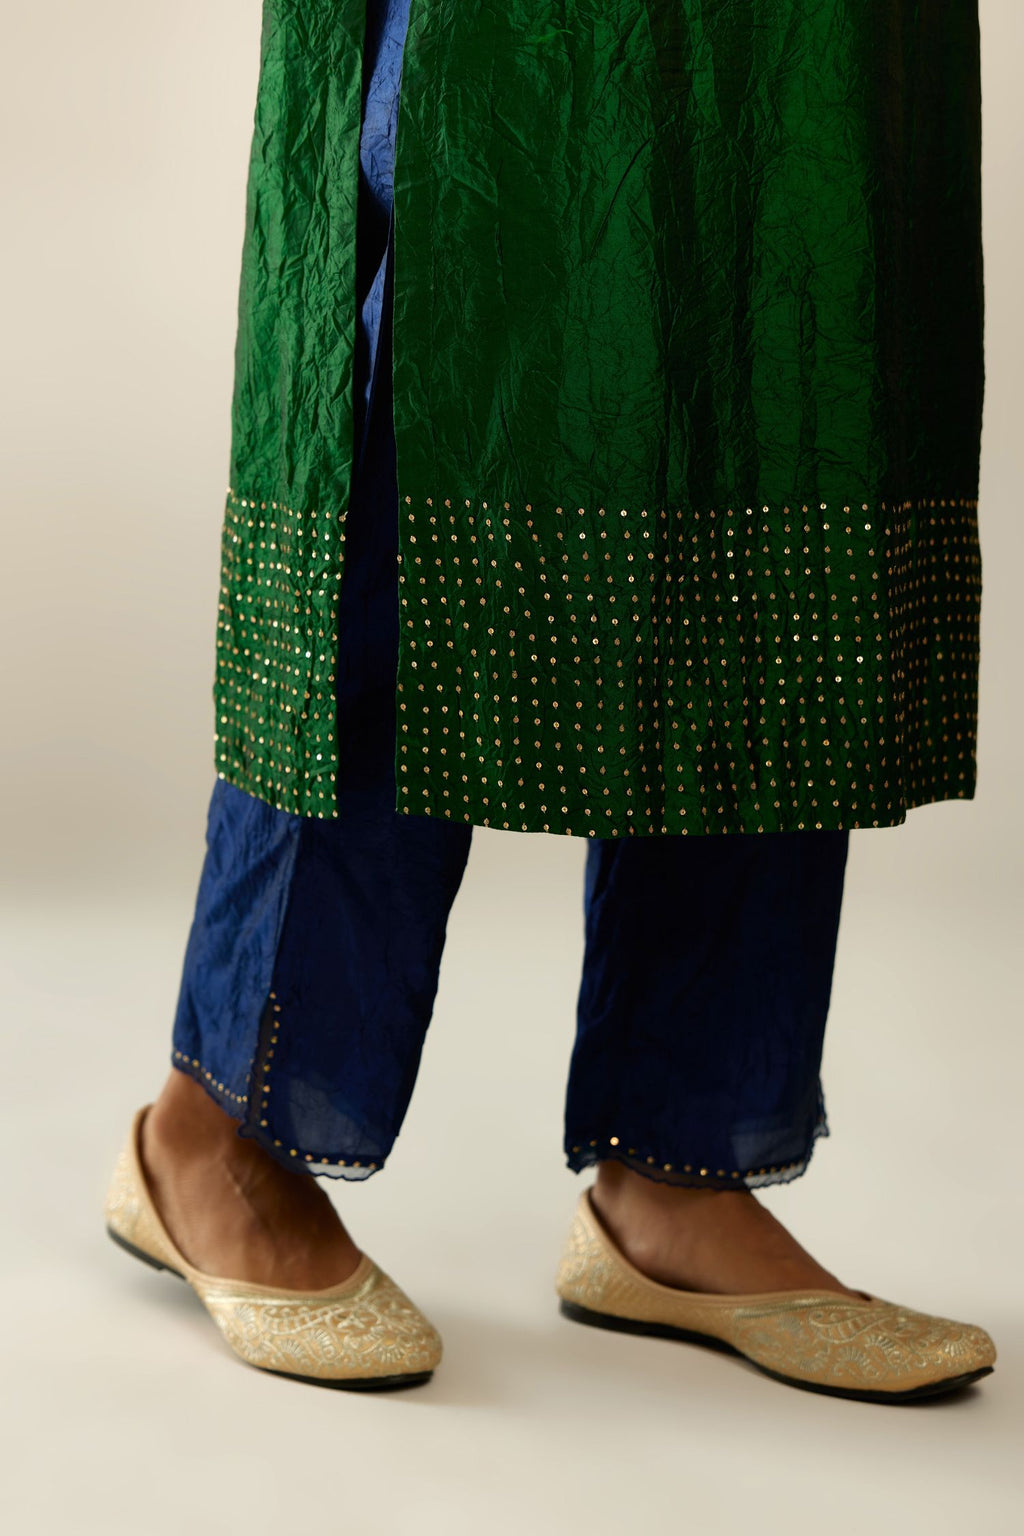 Dark green silk hand crushed kurta set with concealed button placket neckline, highlighted with gold sequins.